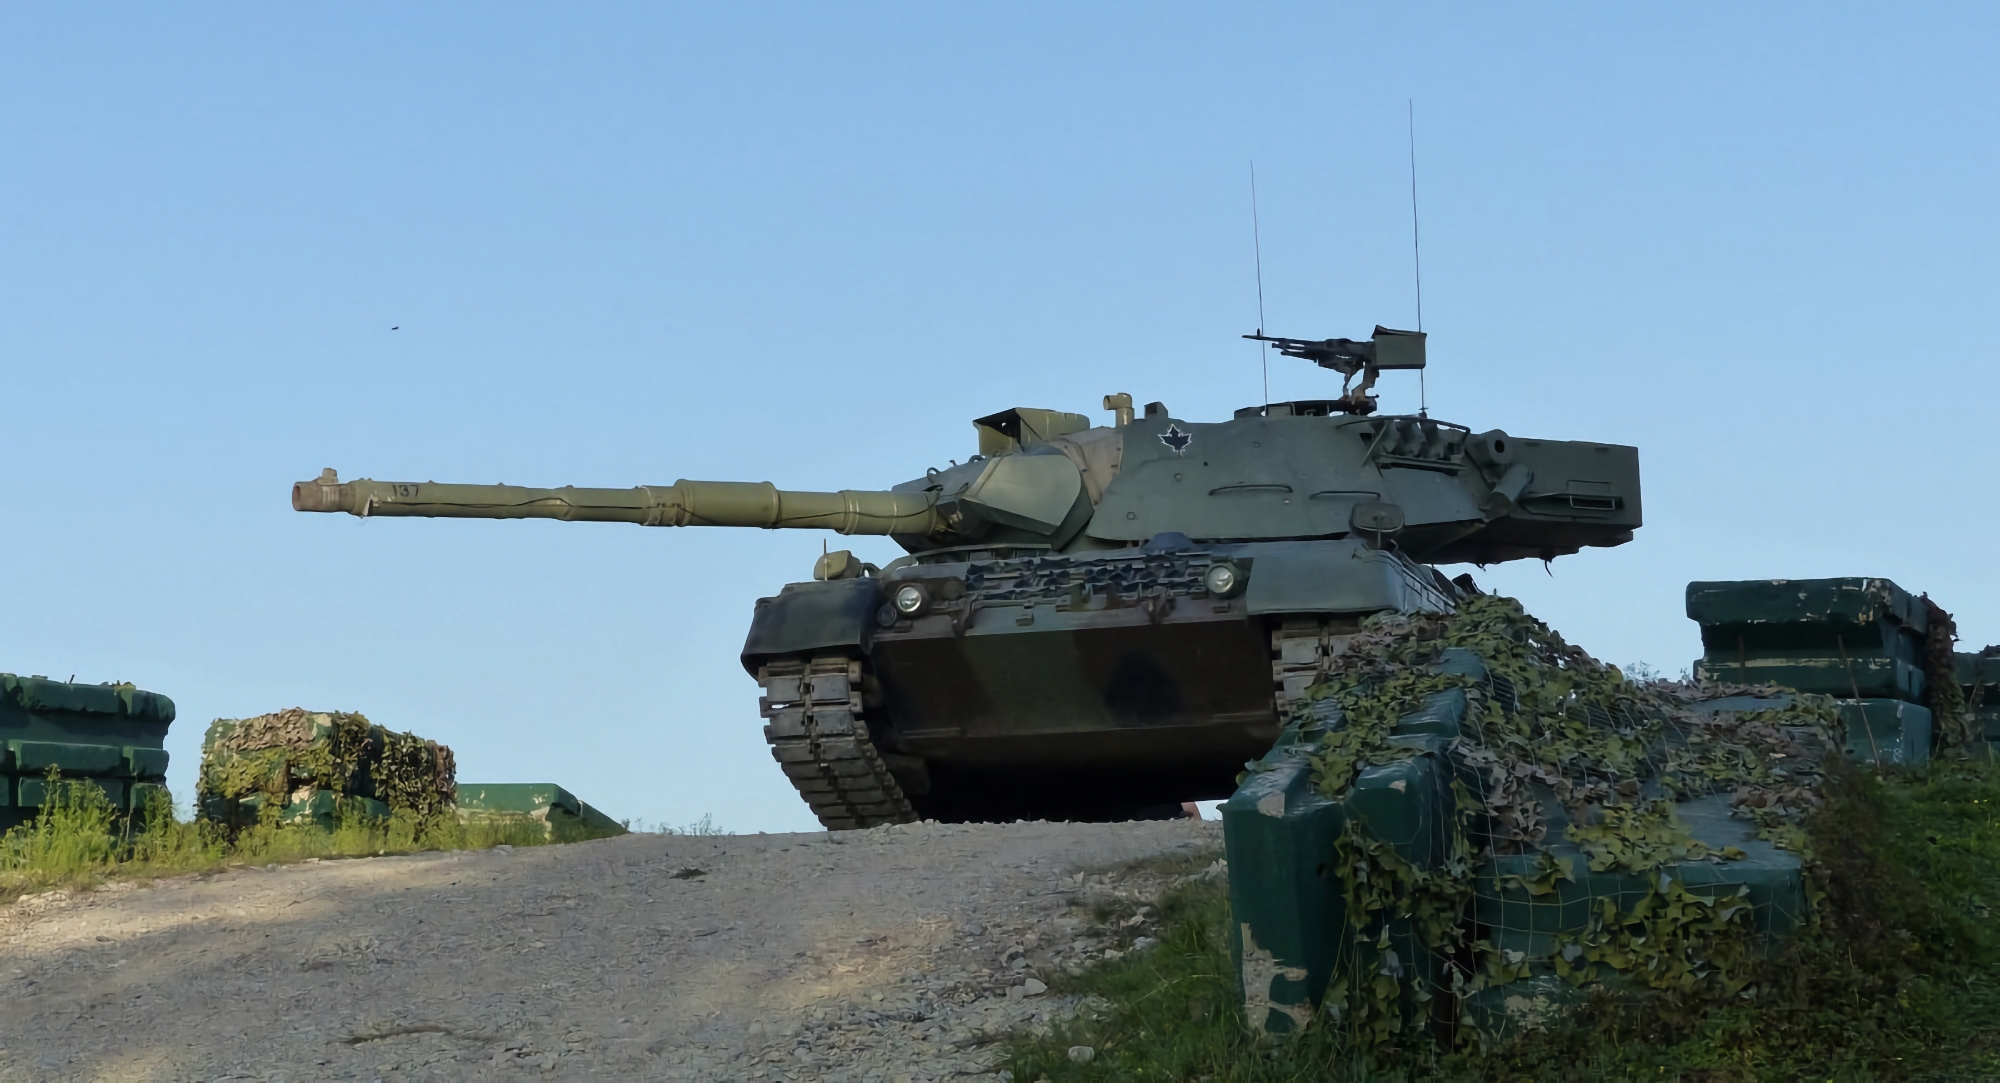 Not just air defence systems: Germany will soon hand over a new batch of Leopard 1A5 tanks and protected vehicles to Ukraine